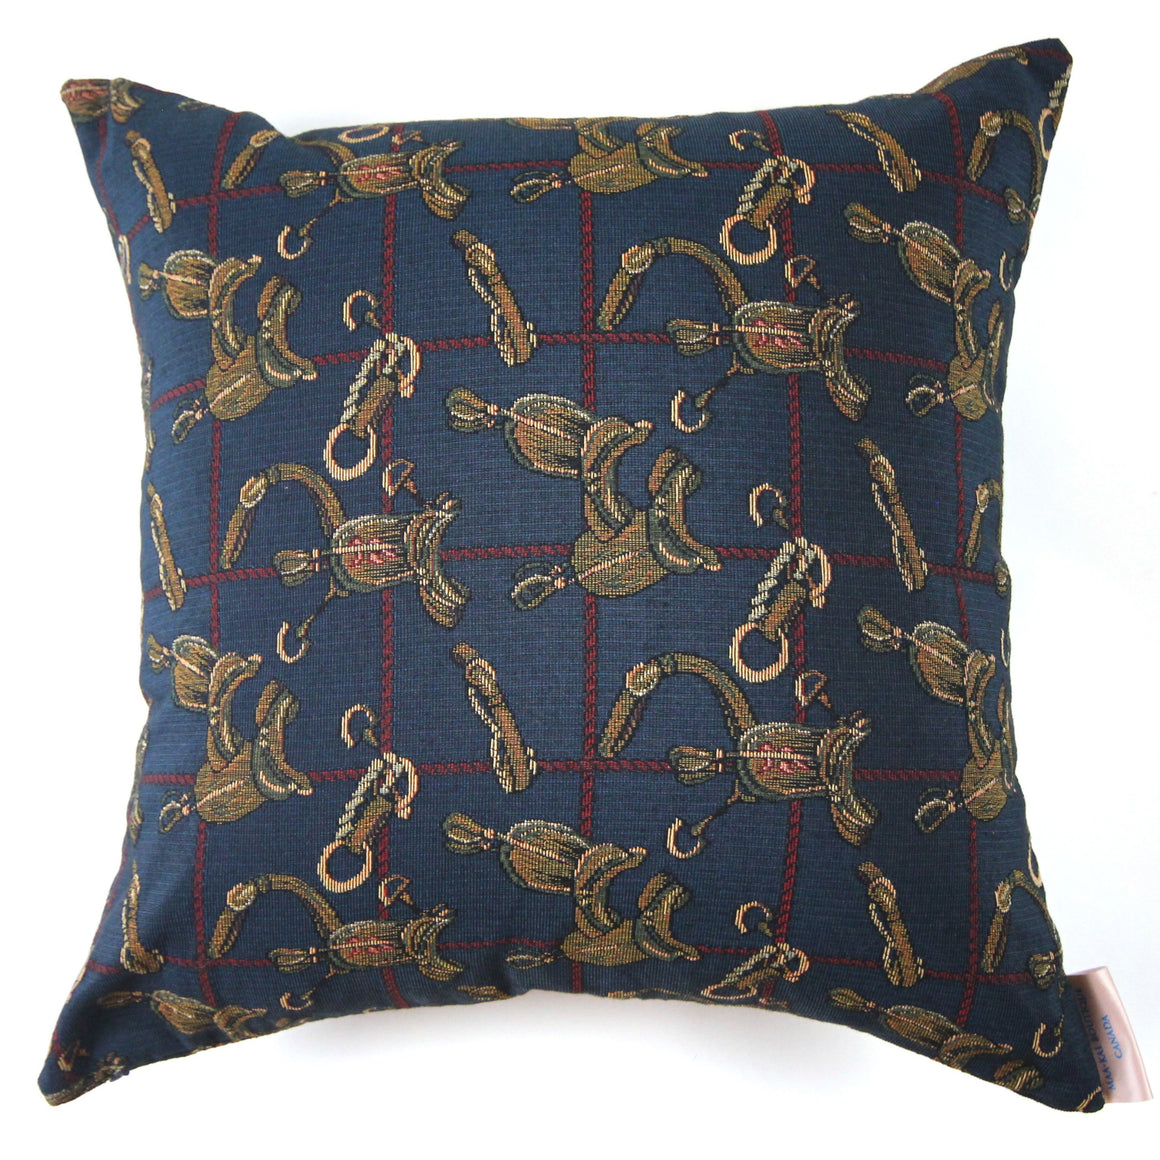 Zachary - Blue and Red Plaid with Yellow Saddles Print Pillow Cover - 20x20 - Maa-Kal Boutique Canada